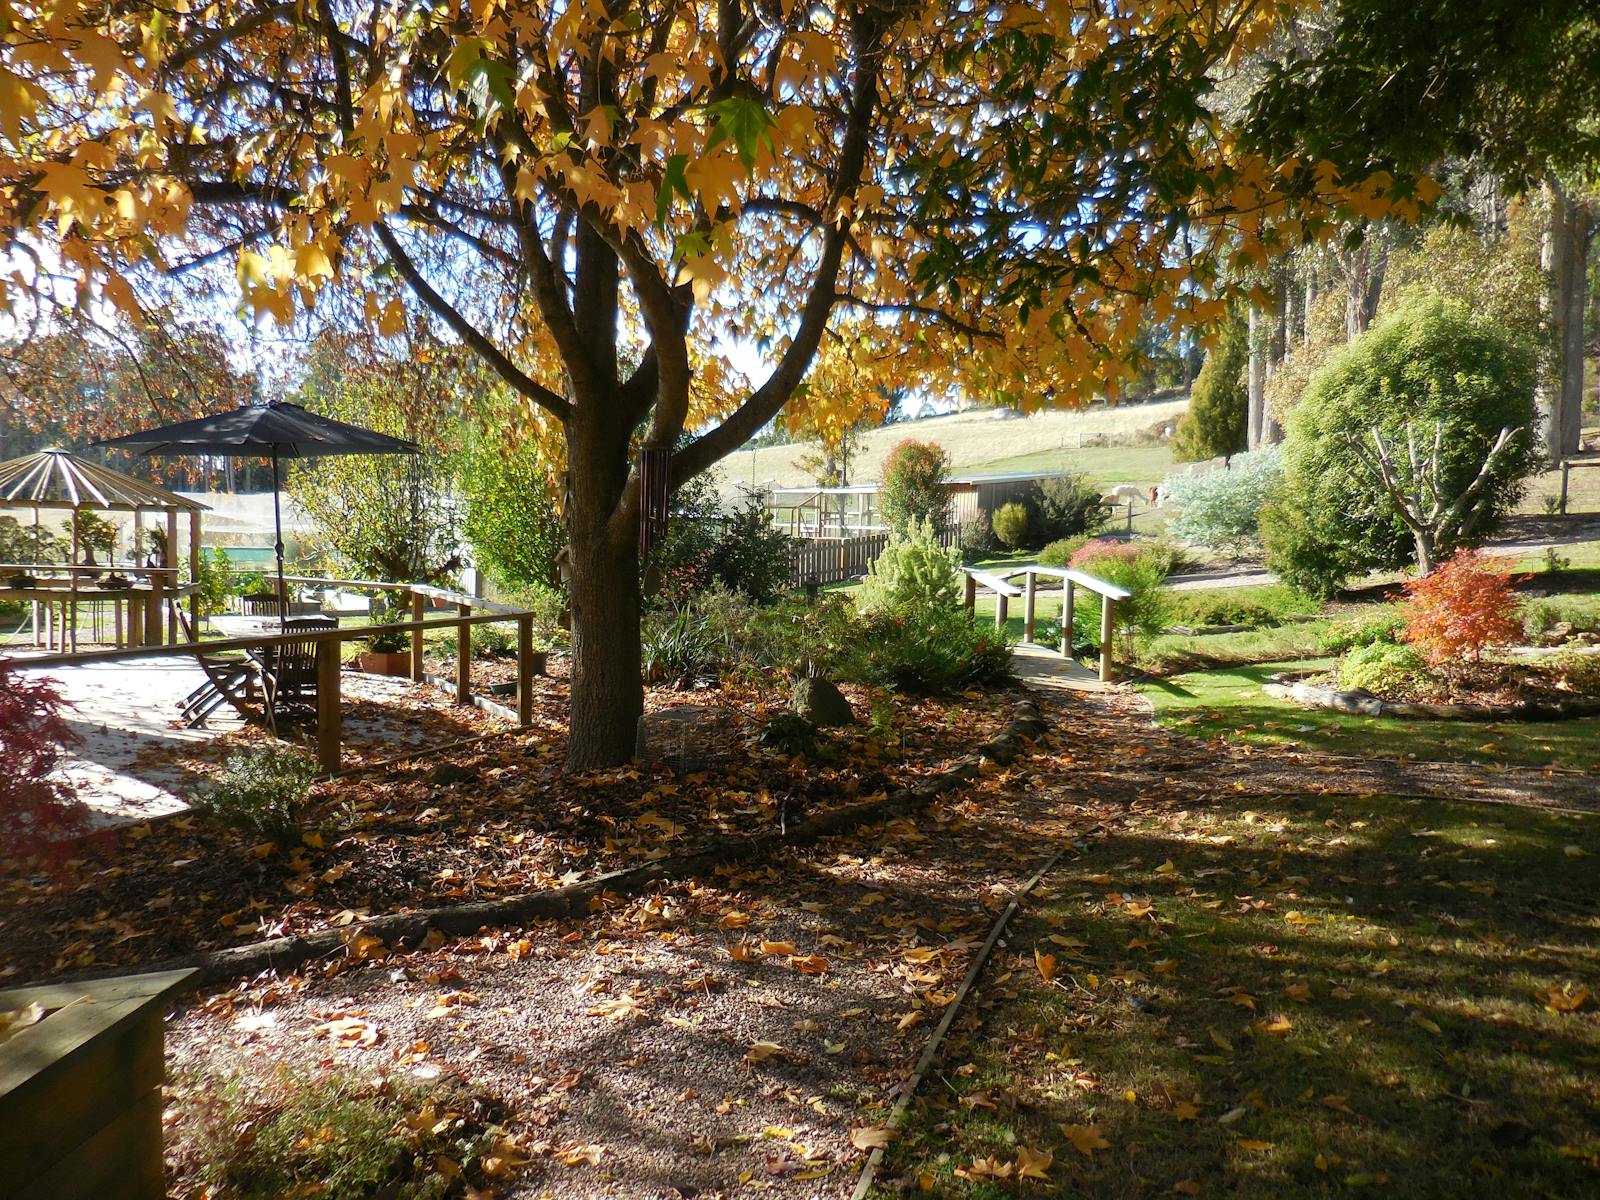 Autumn time in the garden, yellow-leafed tree, gravel path leading to deck, bridge and pond.